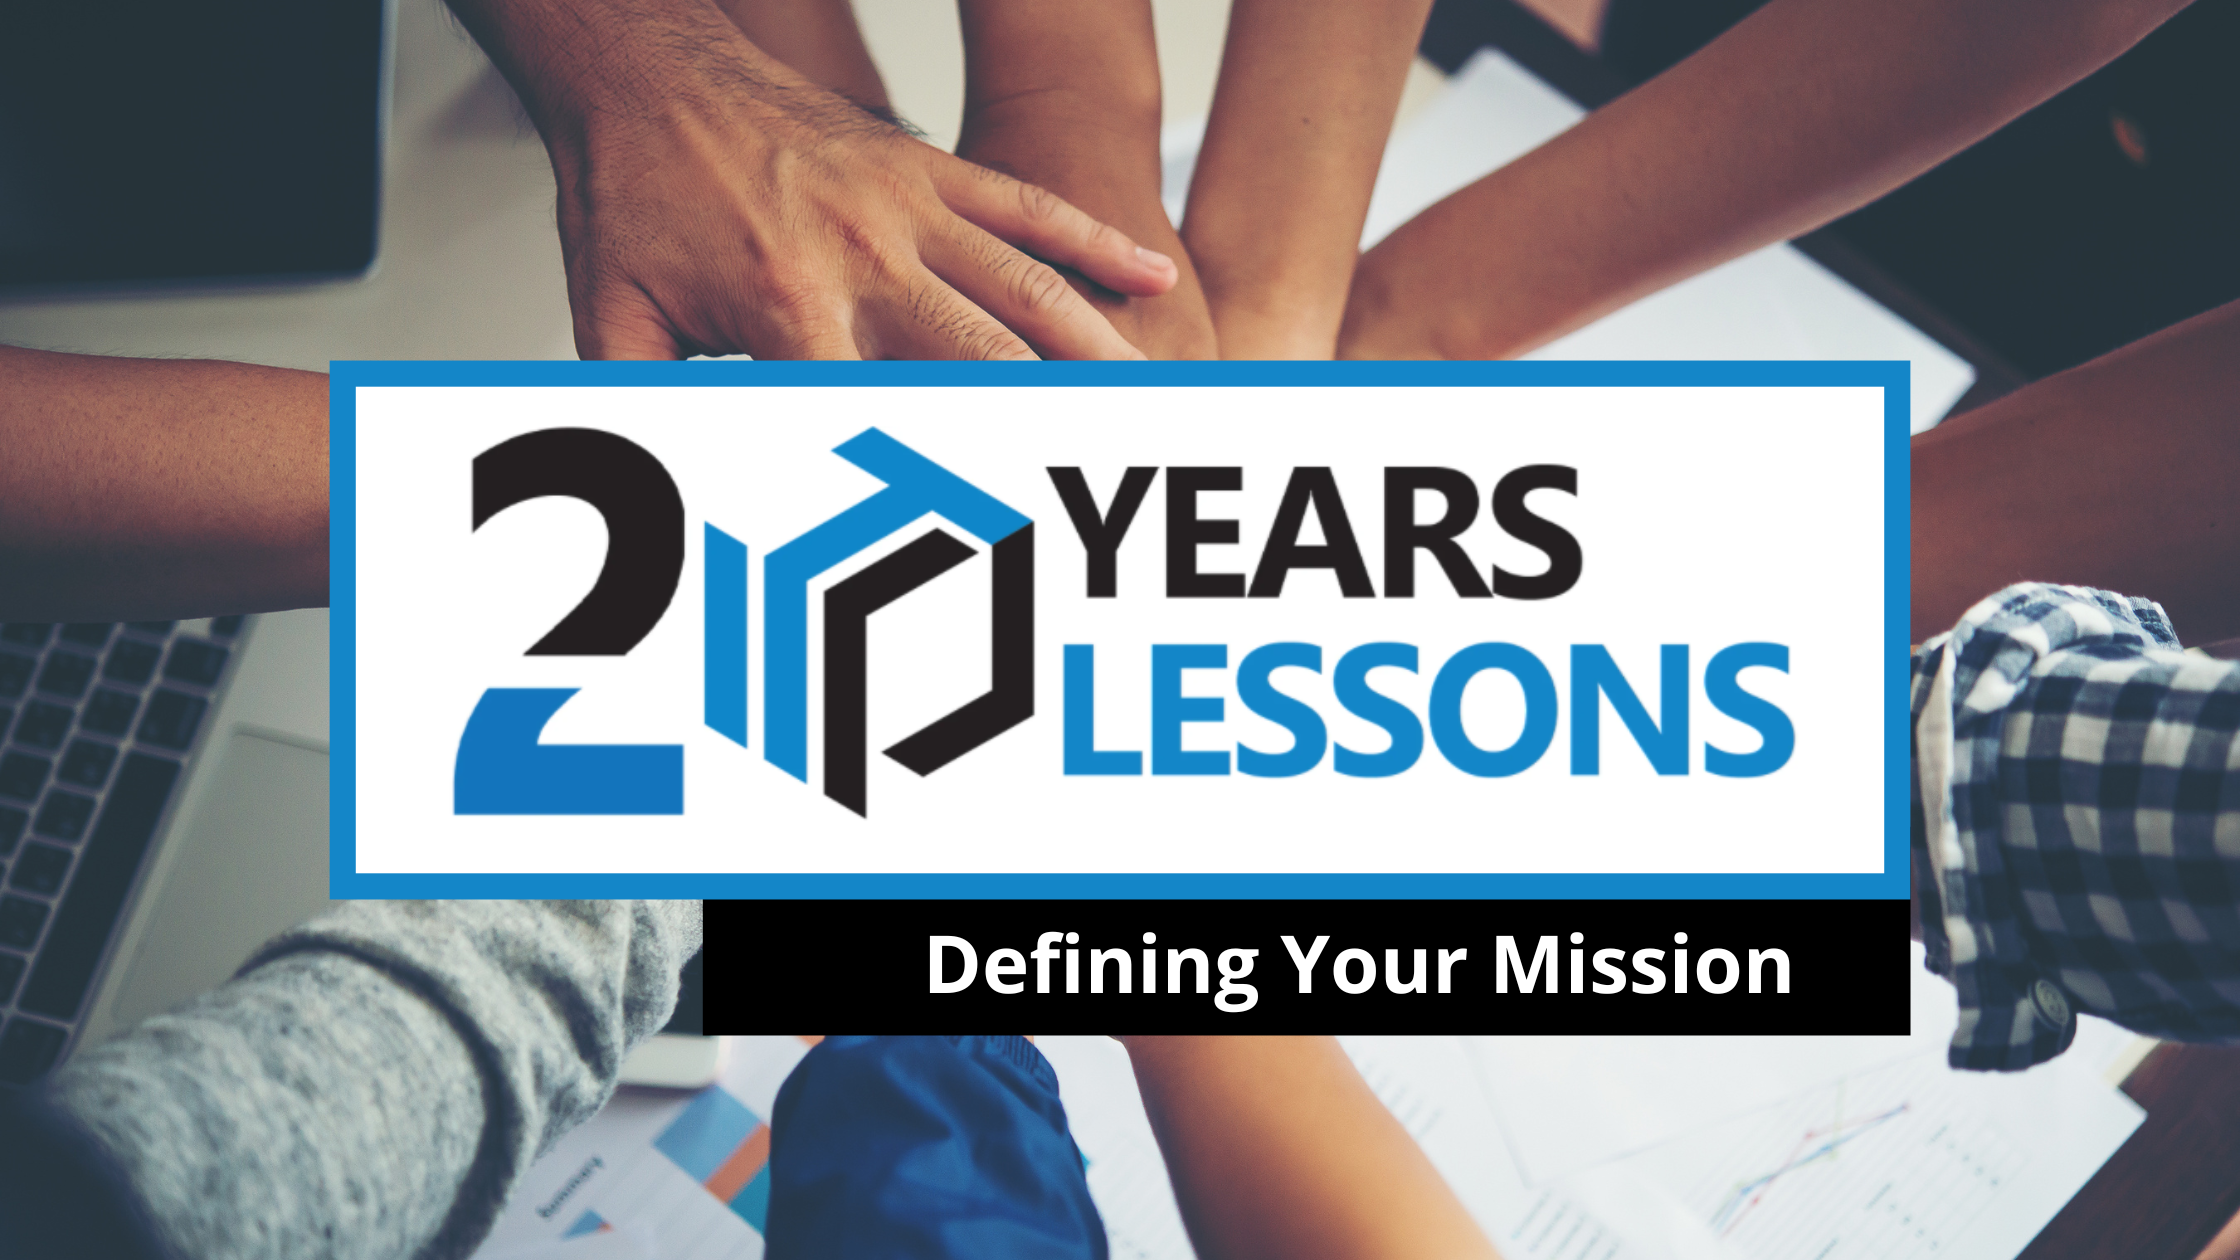 Mission - 20 Years, 20 Lessons